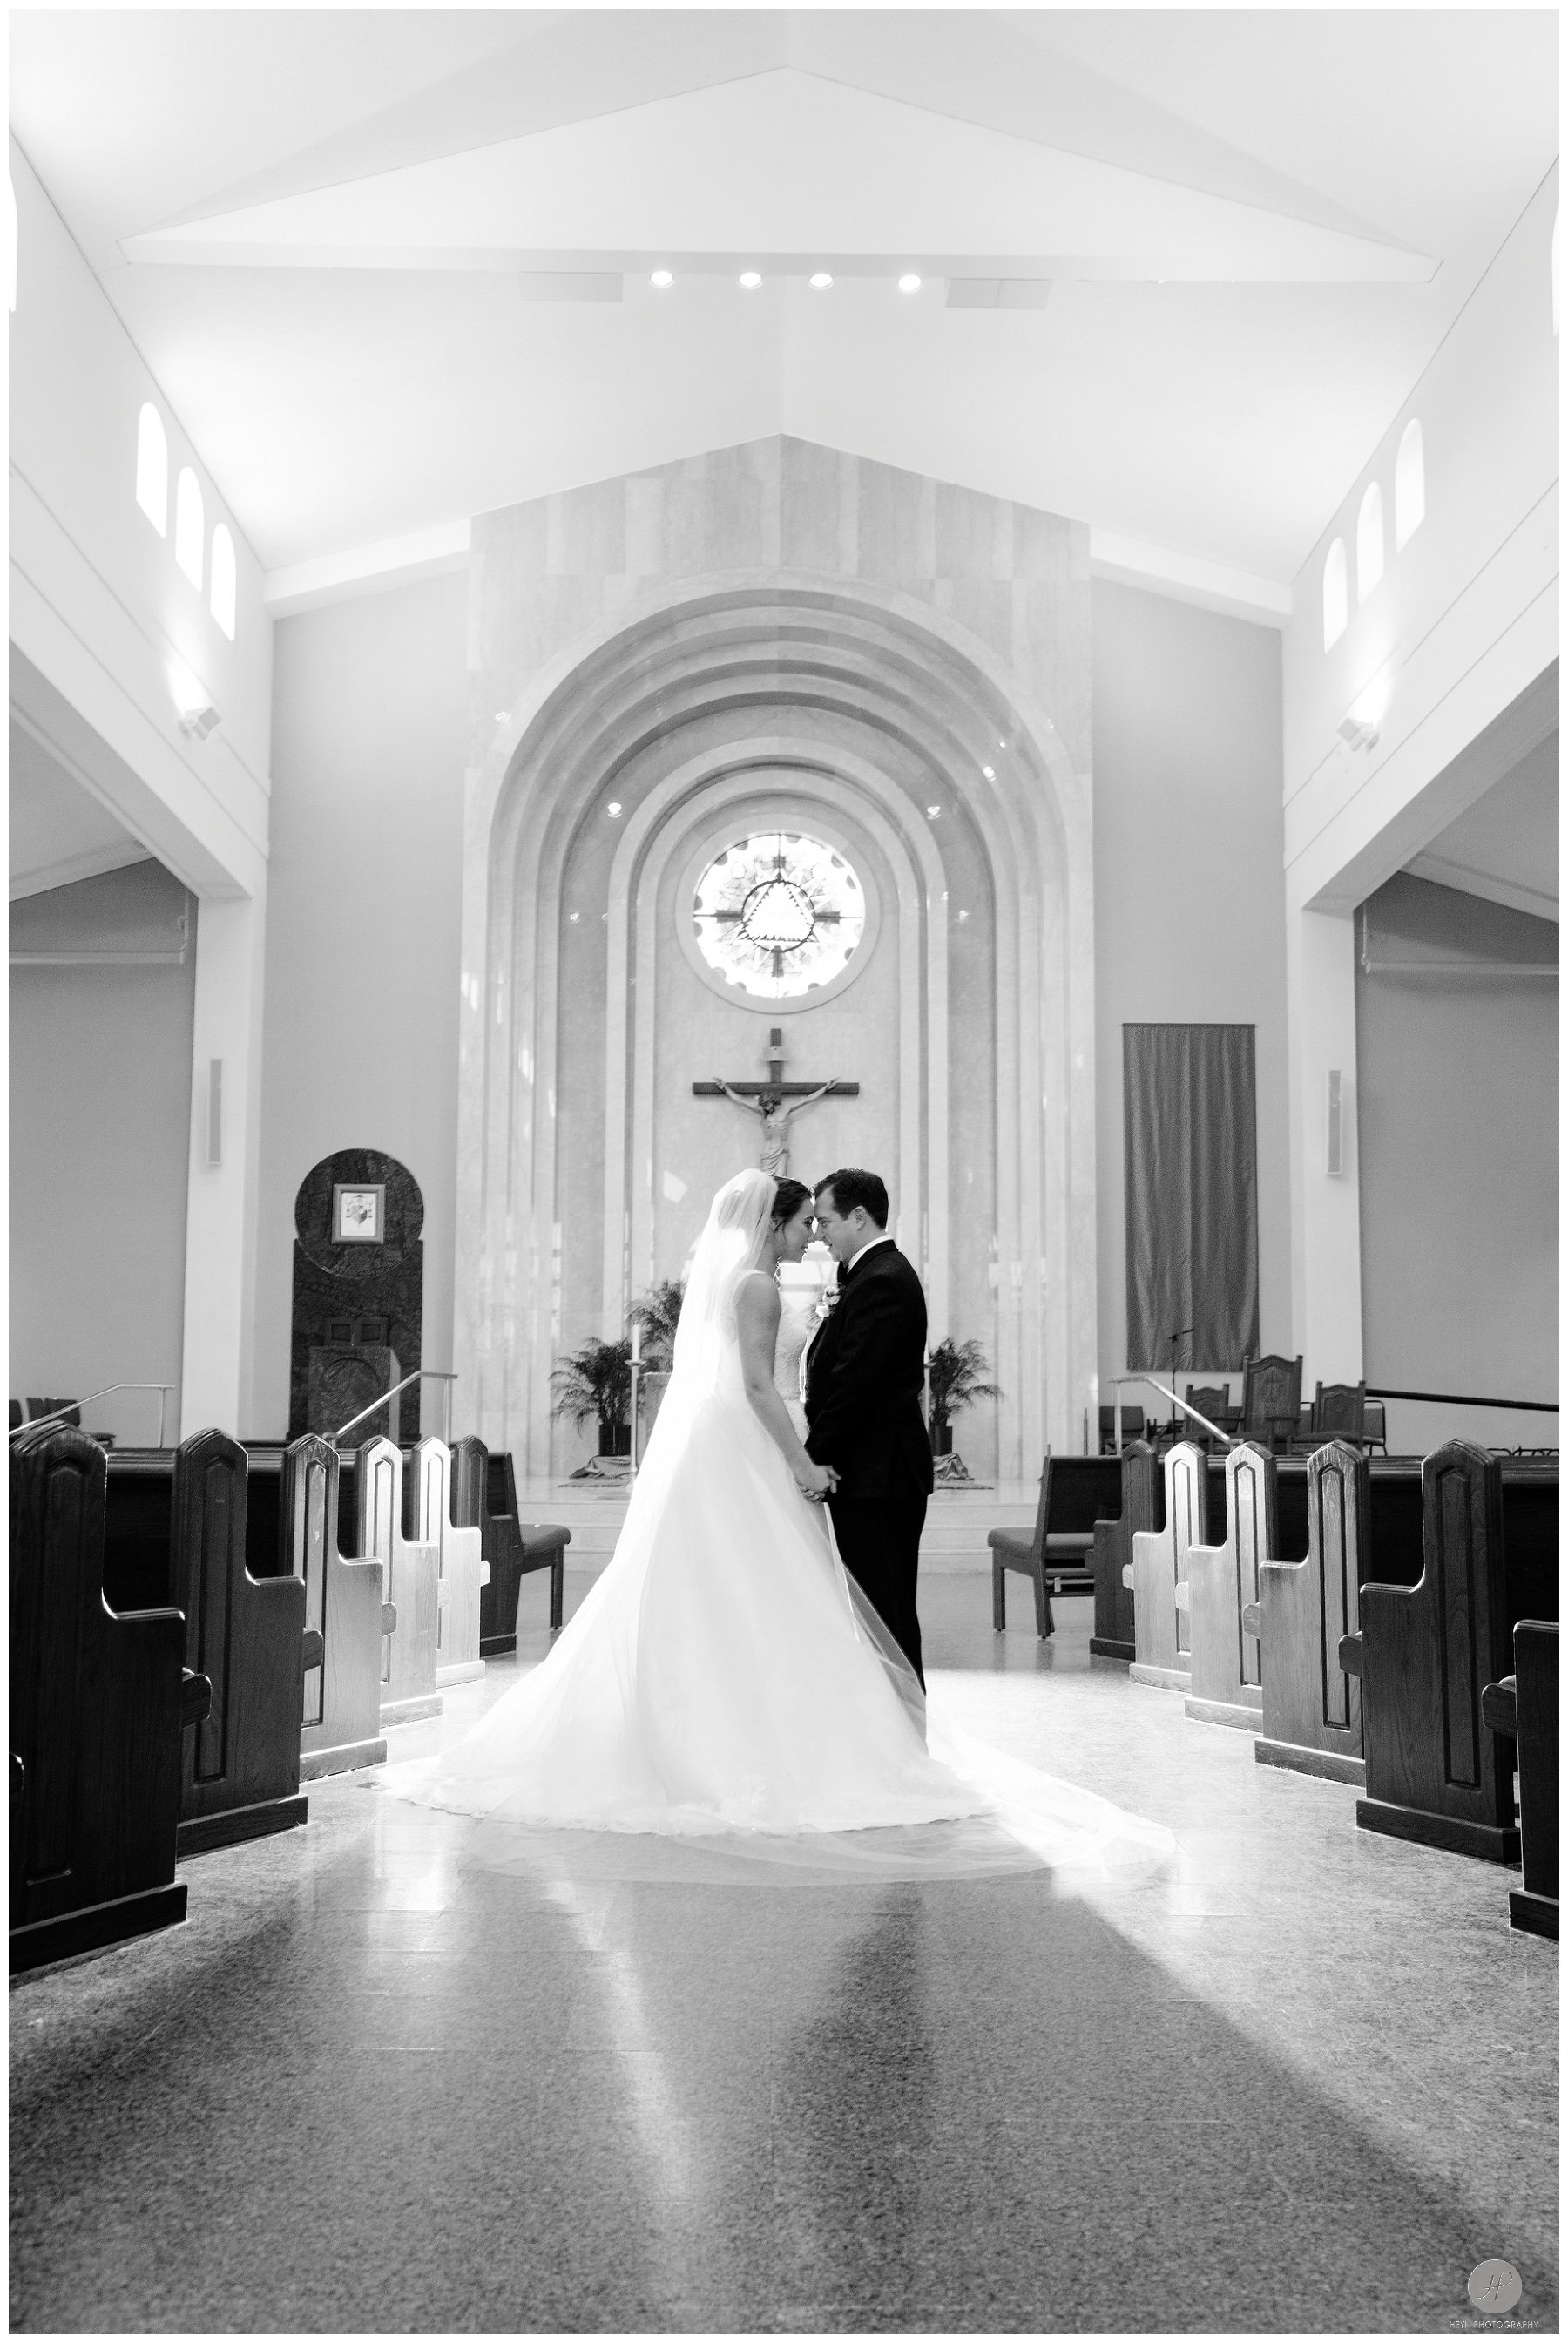 romantic black and white photo of couple in church wedding